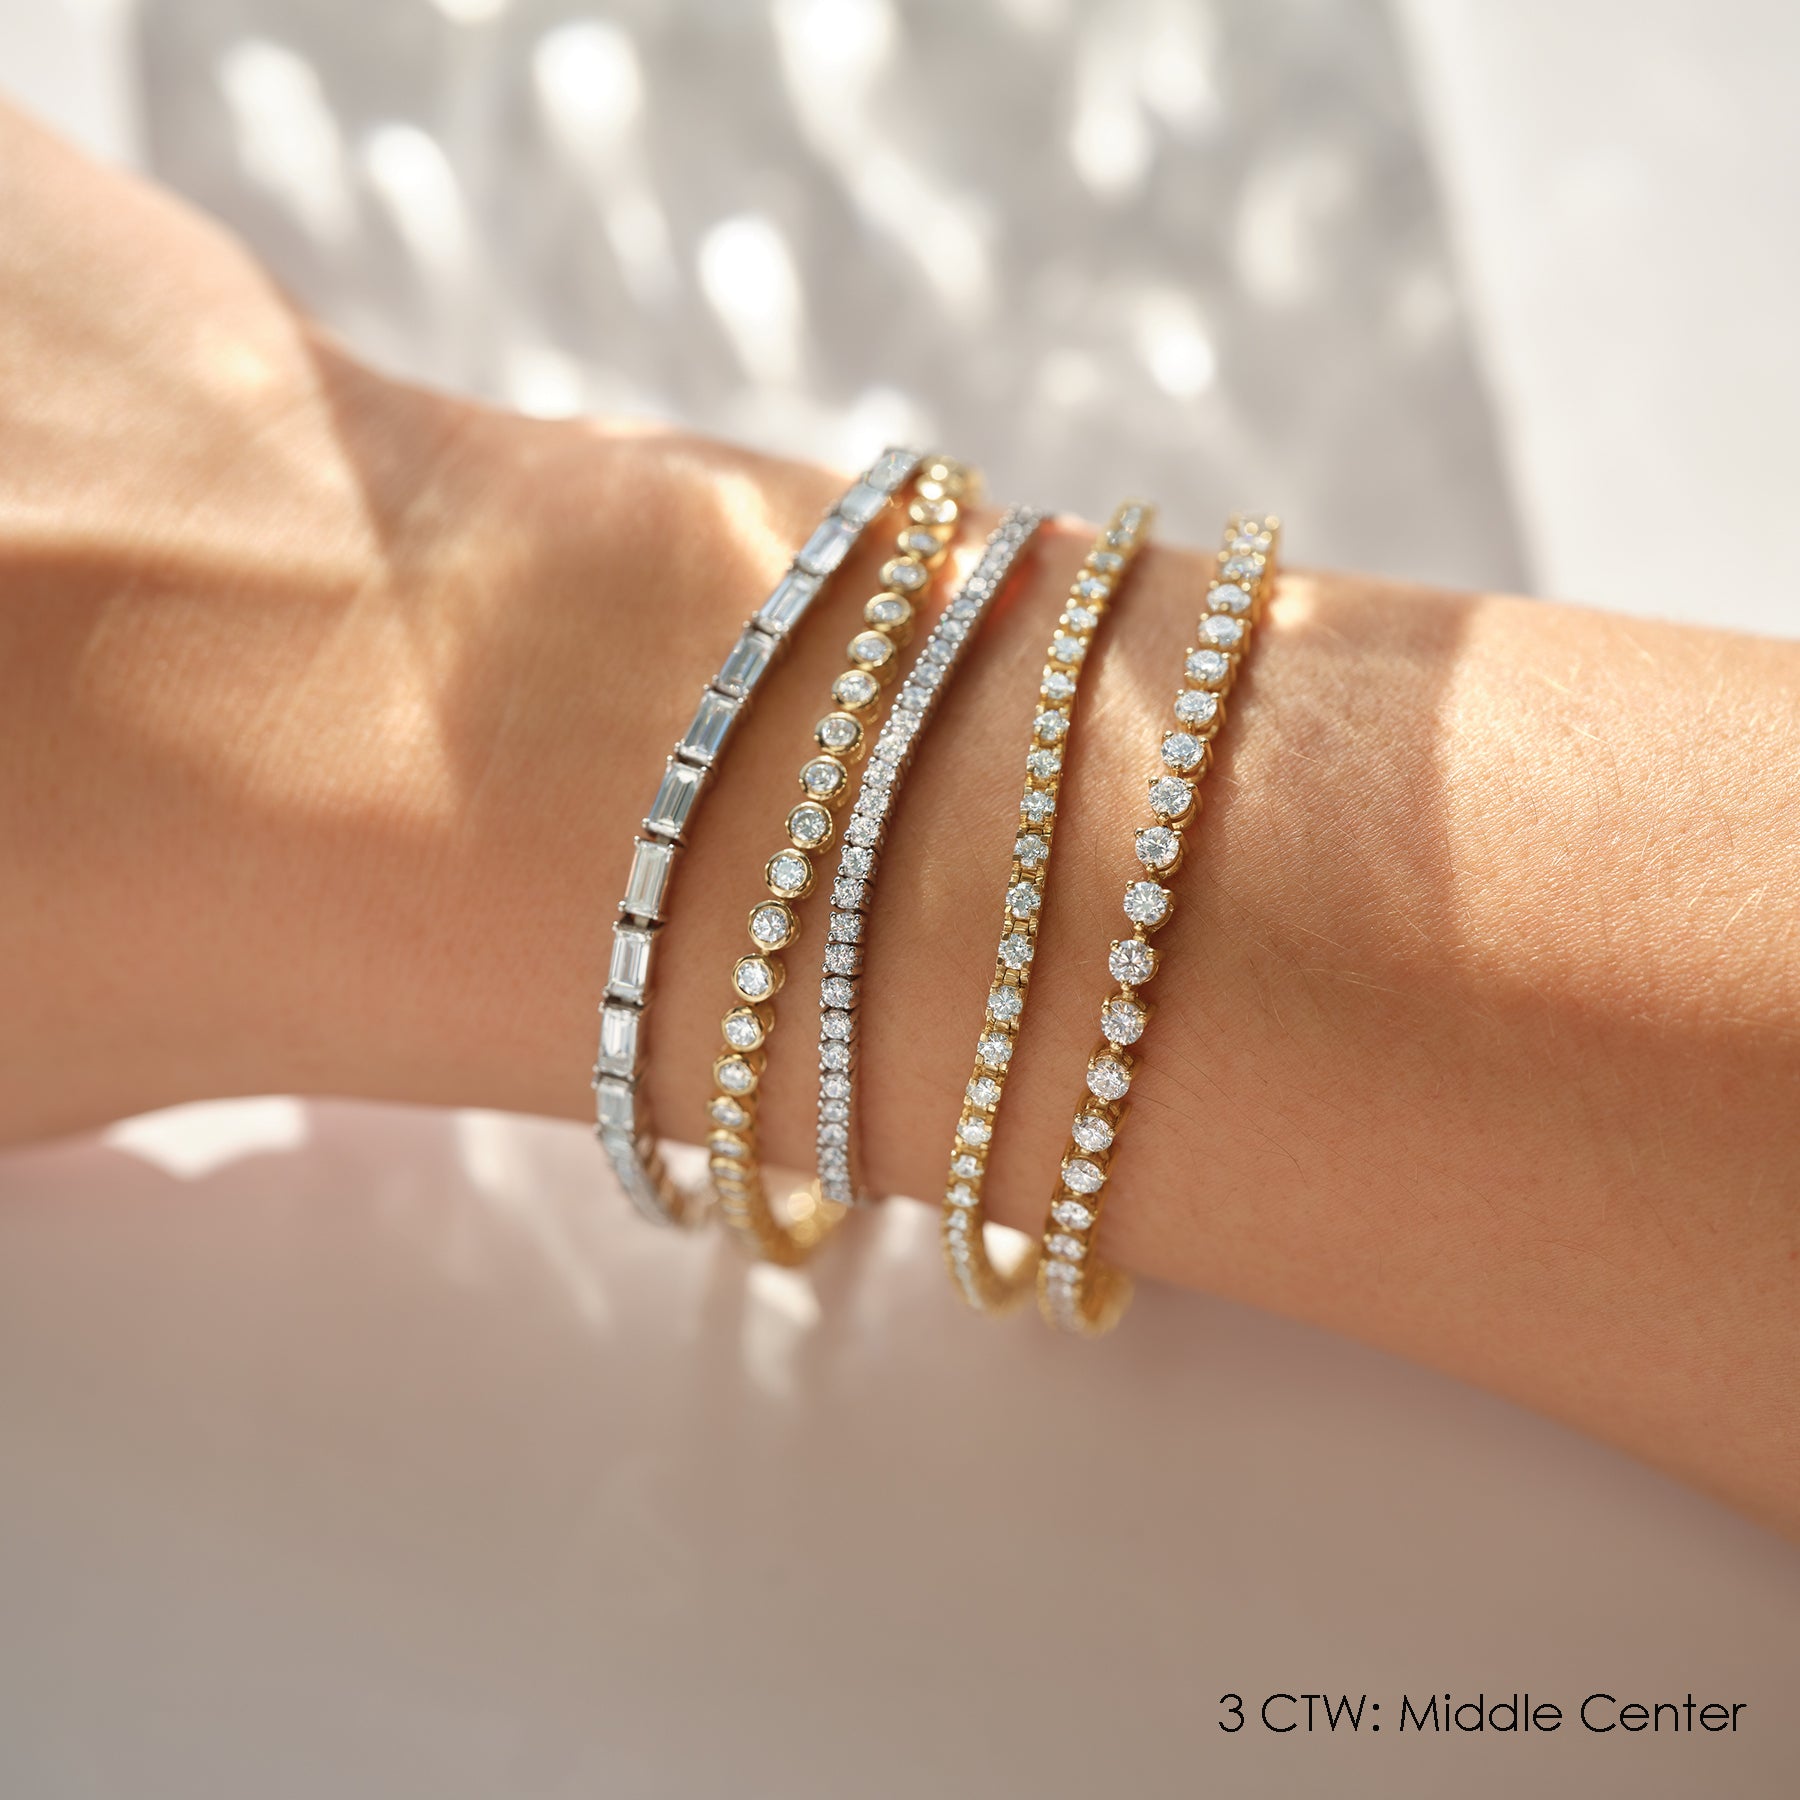 Tiffany Victoria™ Tennis Bracelet in Platinum with Diamonds and Pearls |  Tiffany & Co.